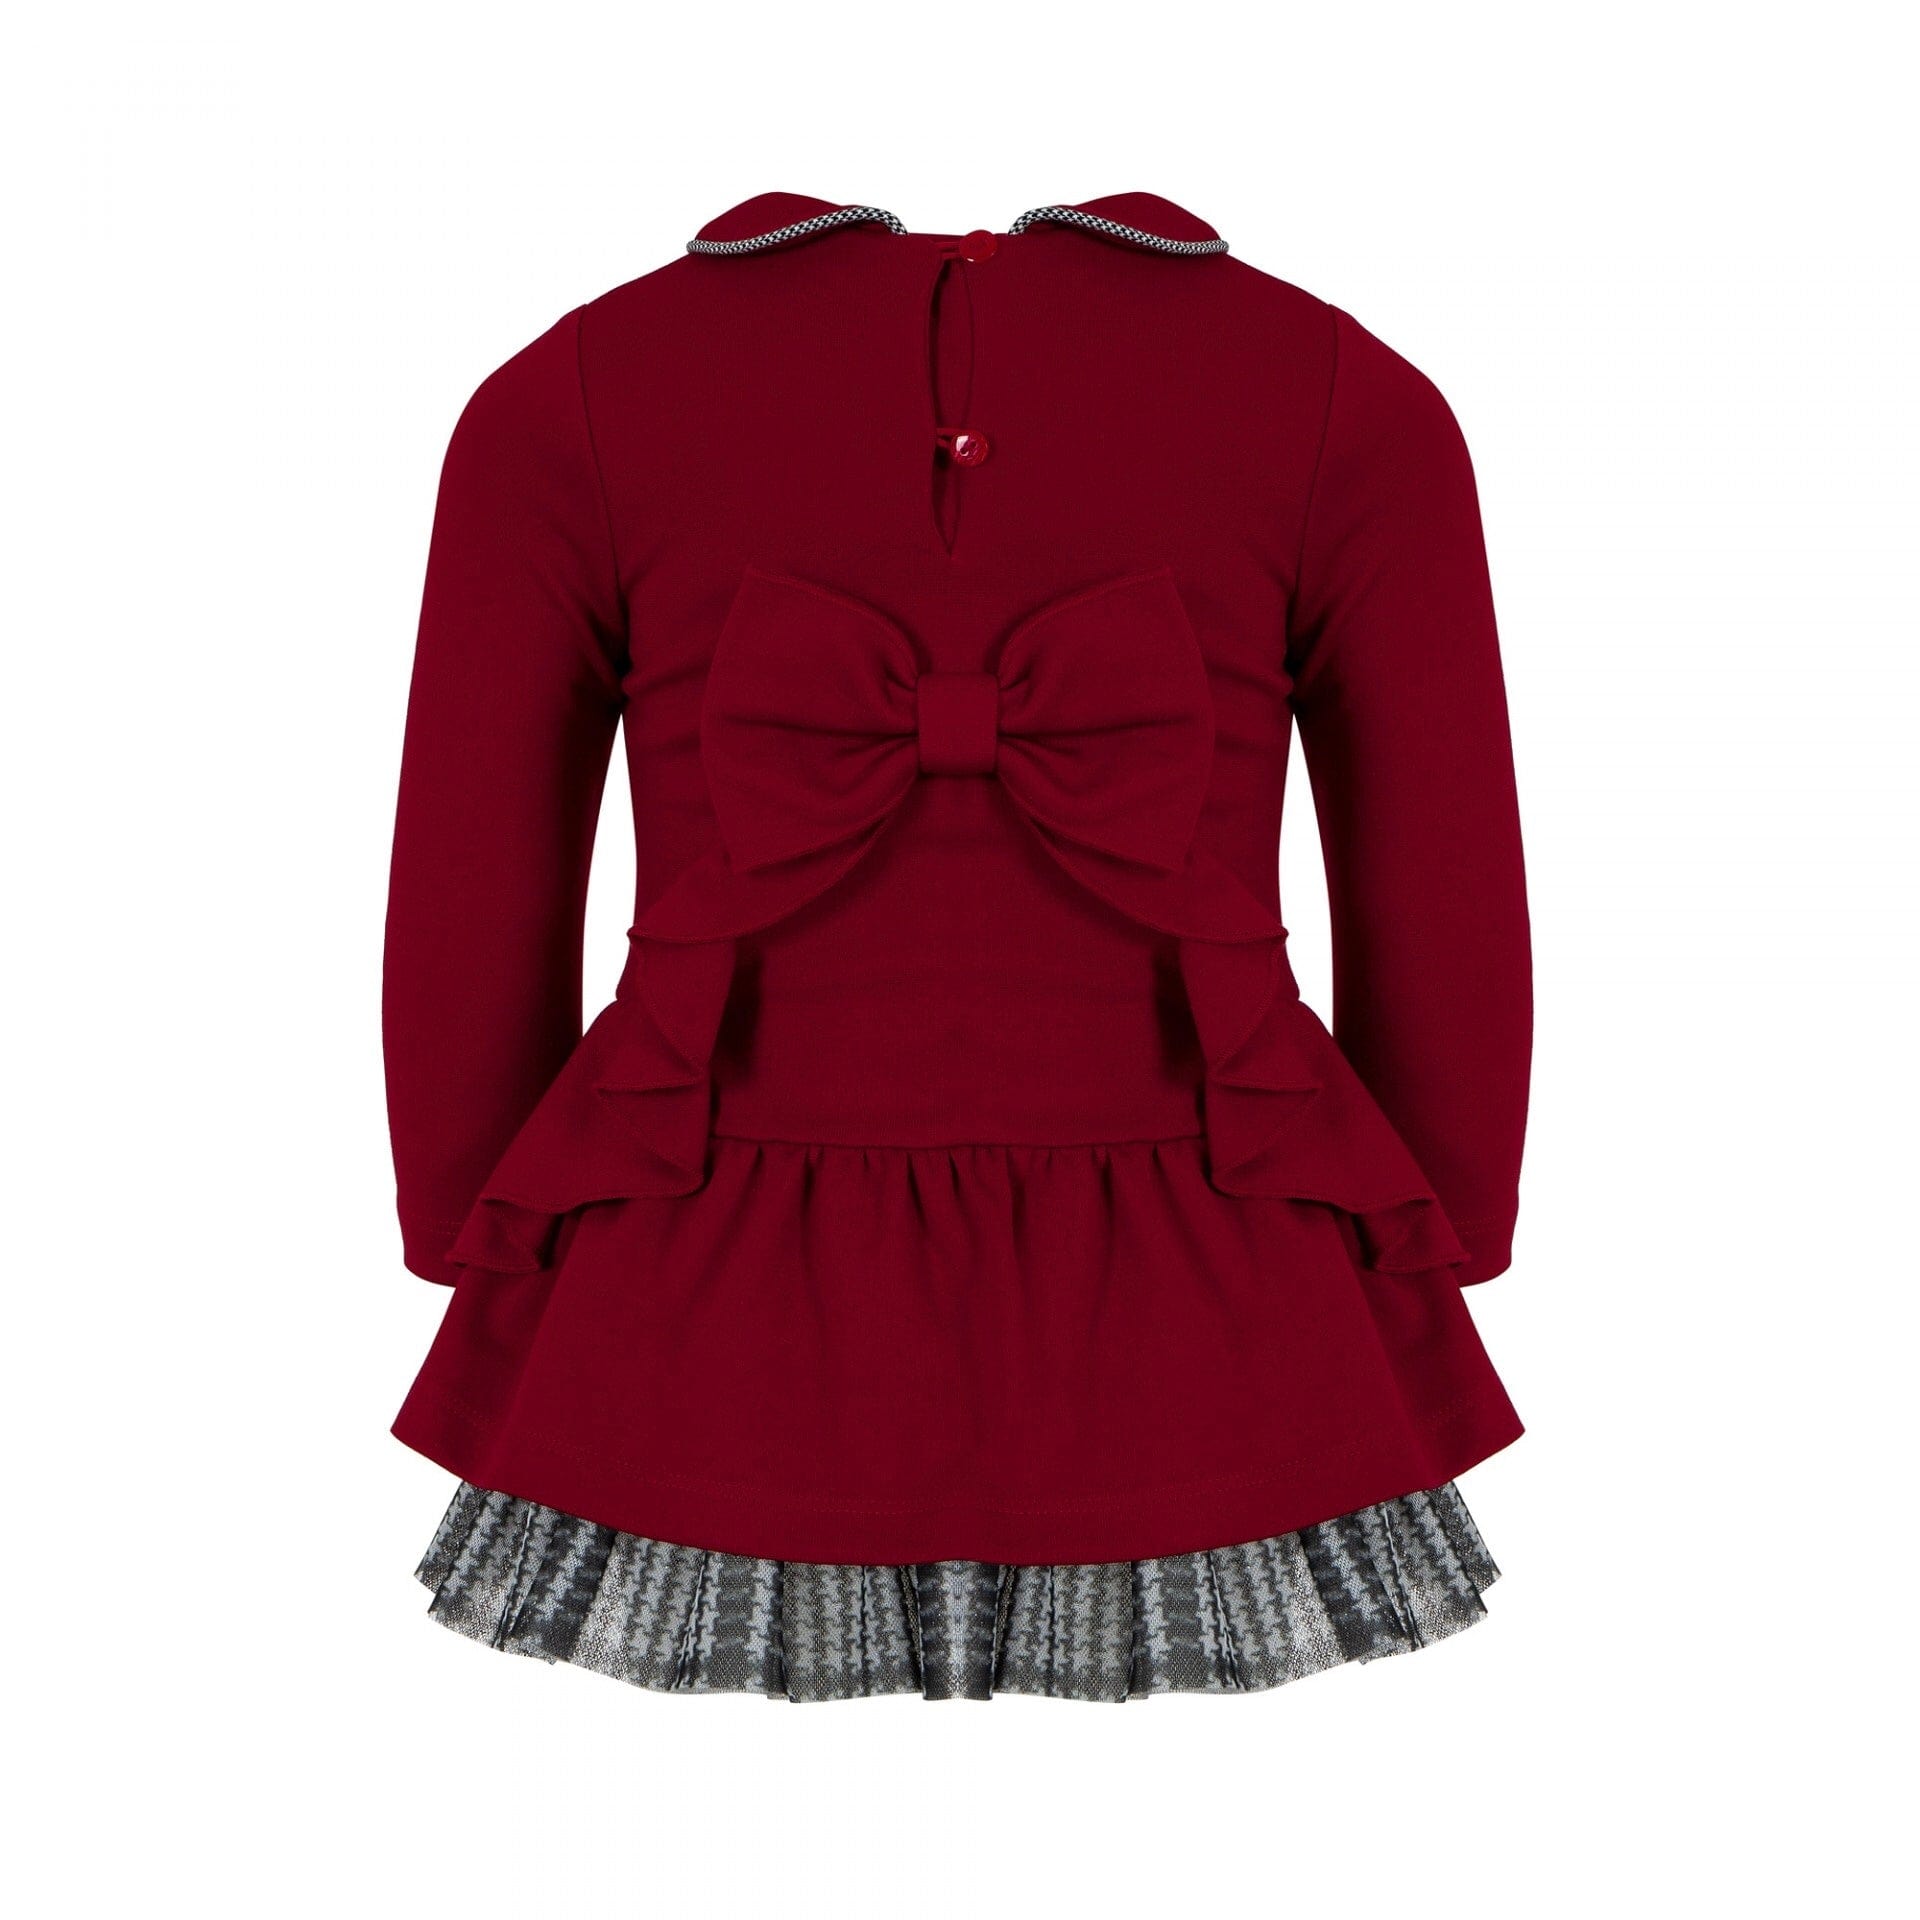 LAPIN HOUSE - Teddy Dress - Red